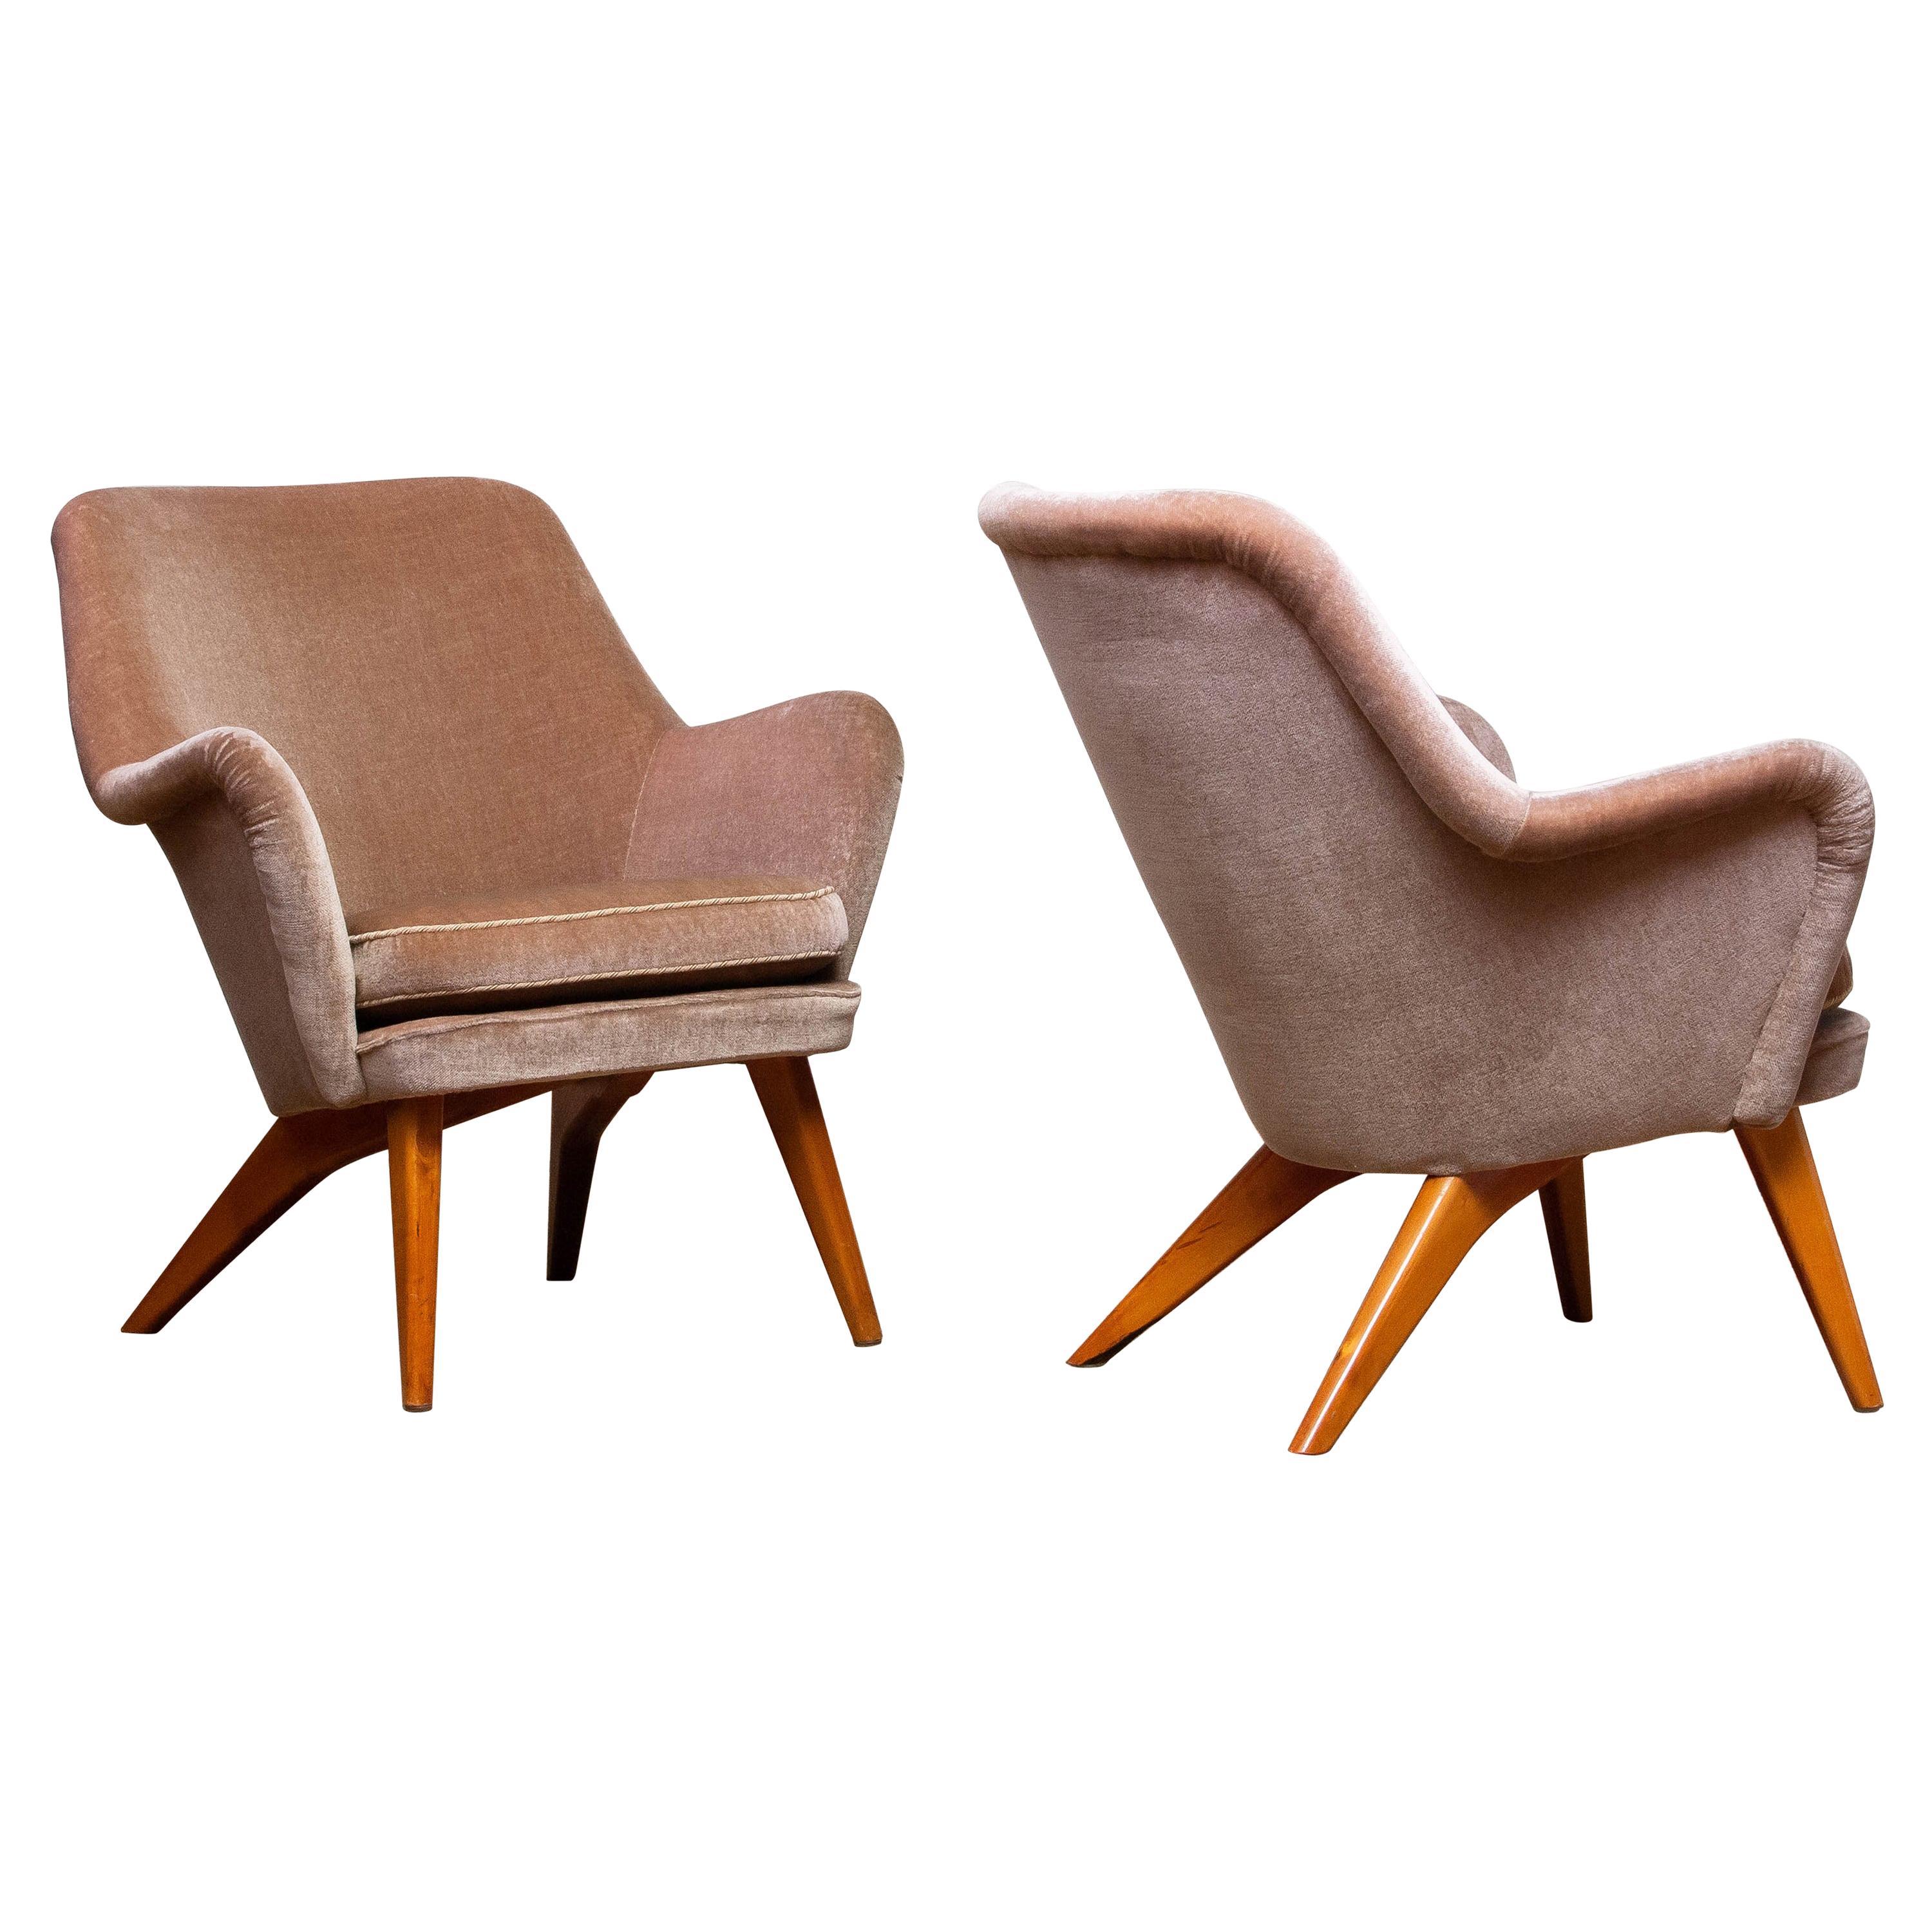 1950s Pair of Chairs by Carl Gustav Hiort af Ornäs for Puunveisto Oy-Trasnideri 9